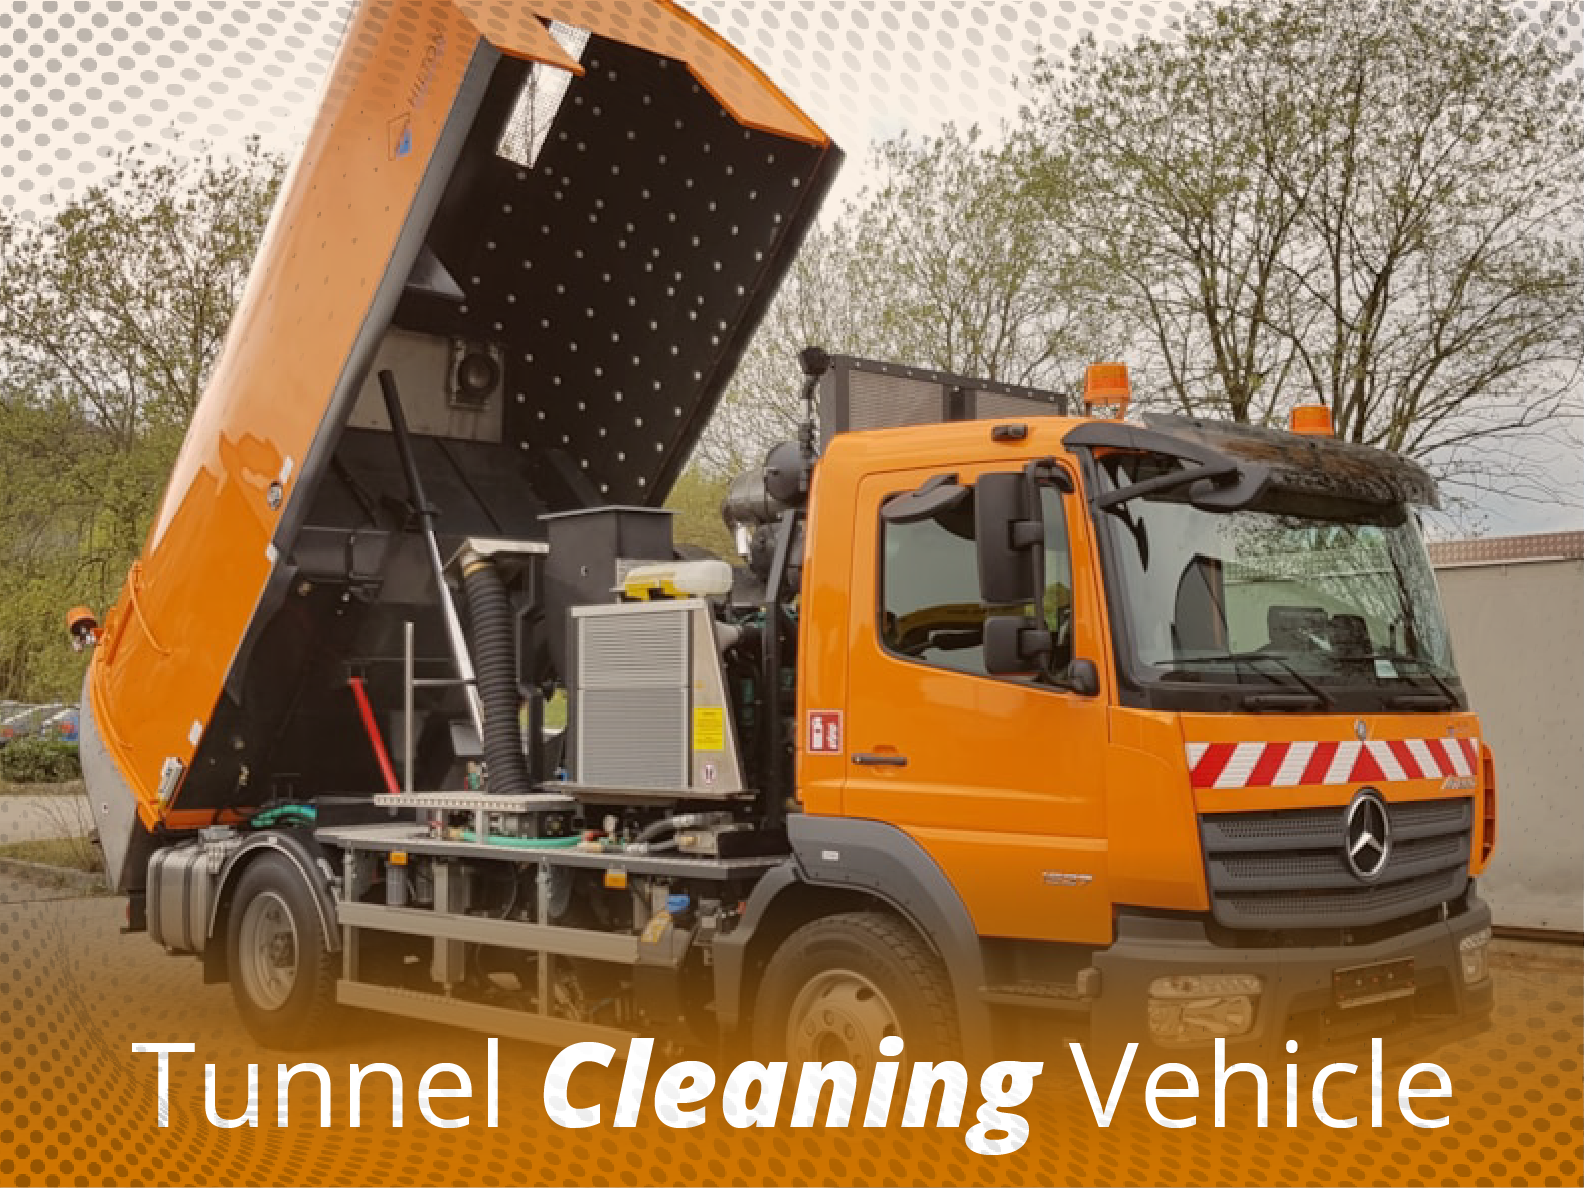 Tunnel Cleaning Vehicles